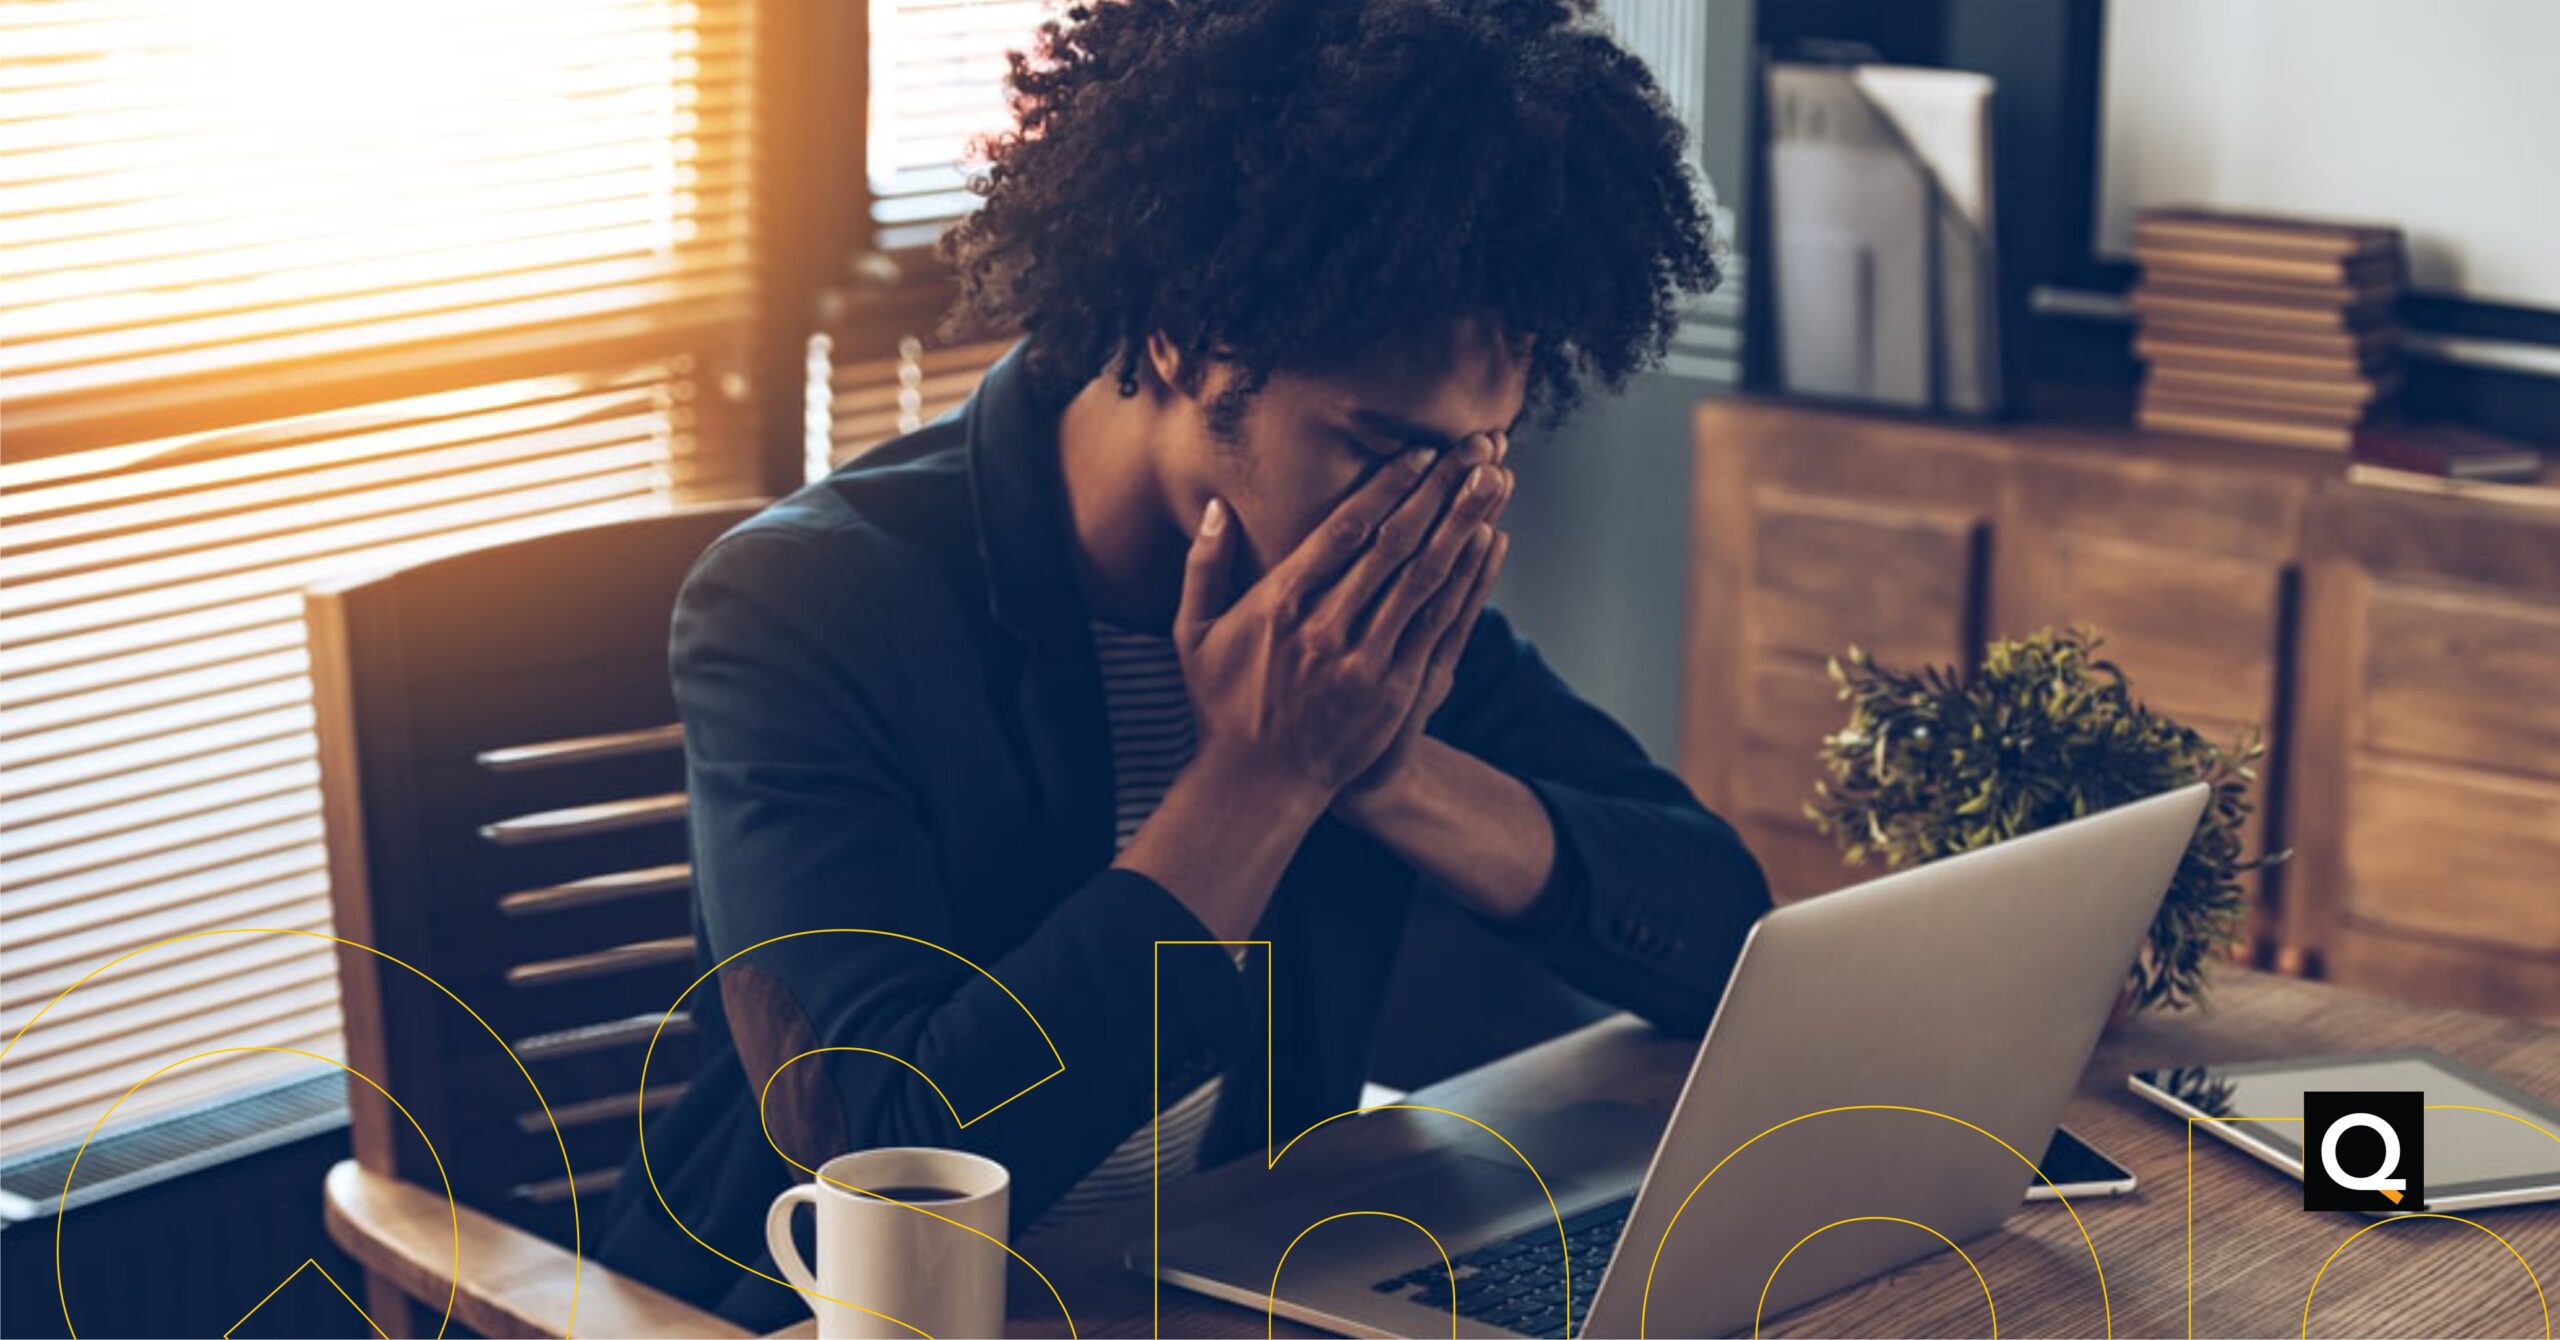 How to manage stress as a business owner